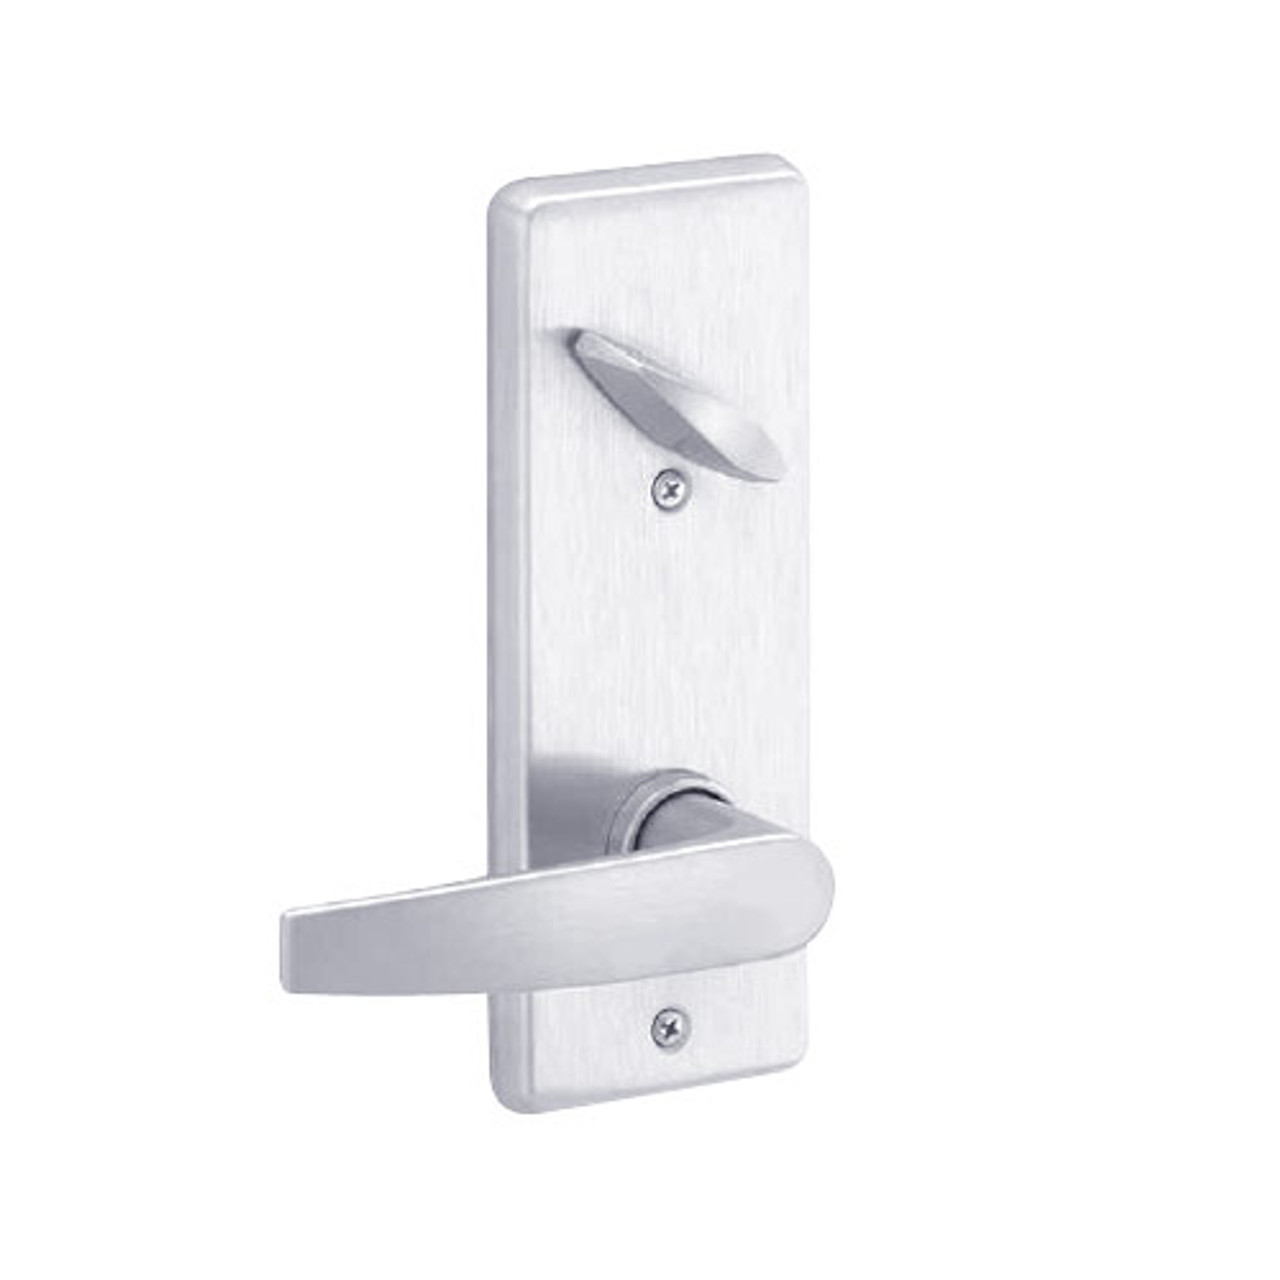 S290-JUP-625 Schlage S290 Jupiter Style Interconnected Lock in Bright Chromium Plated